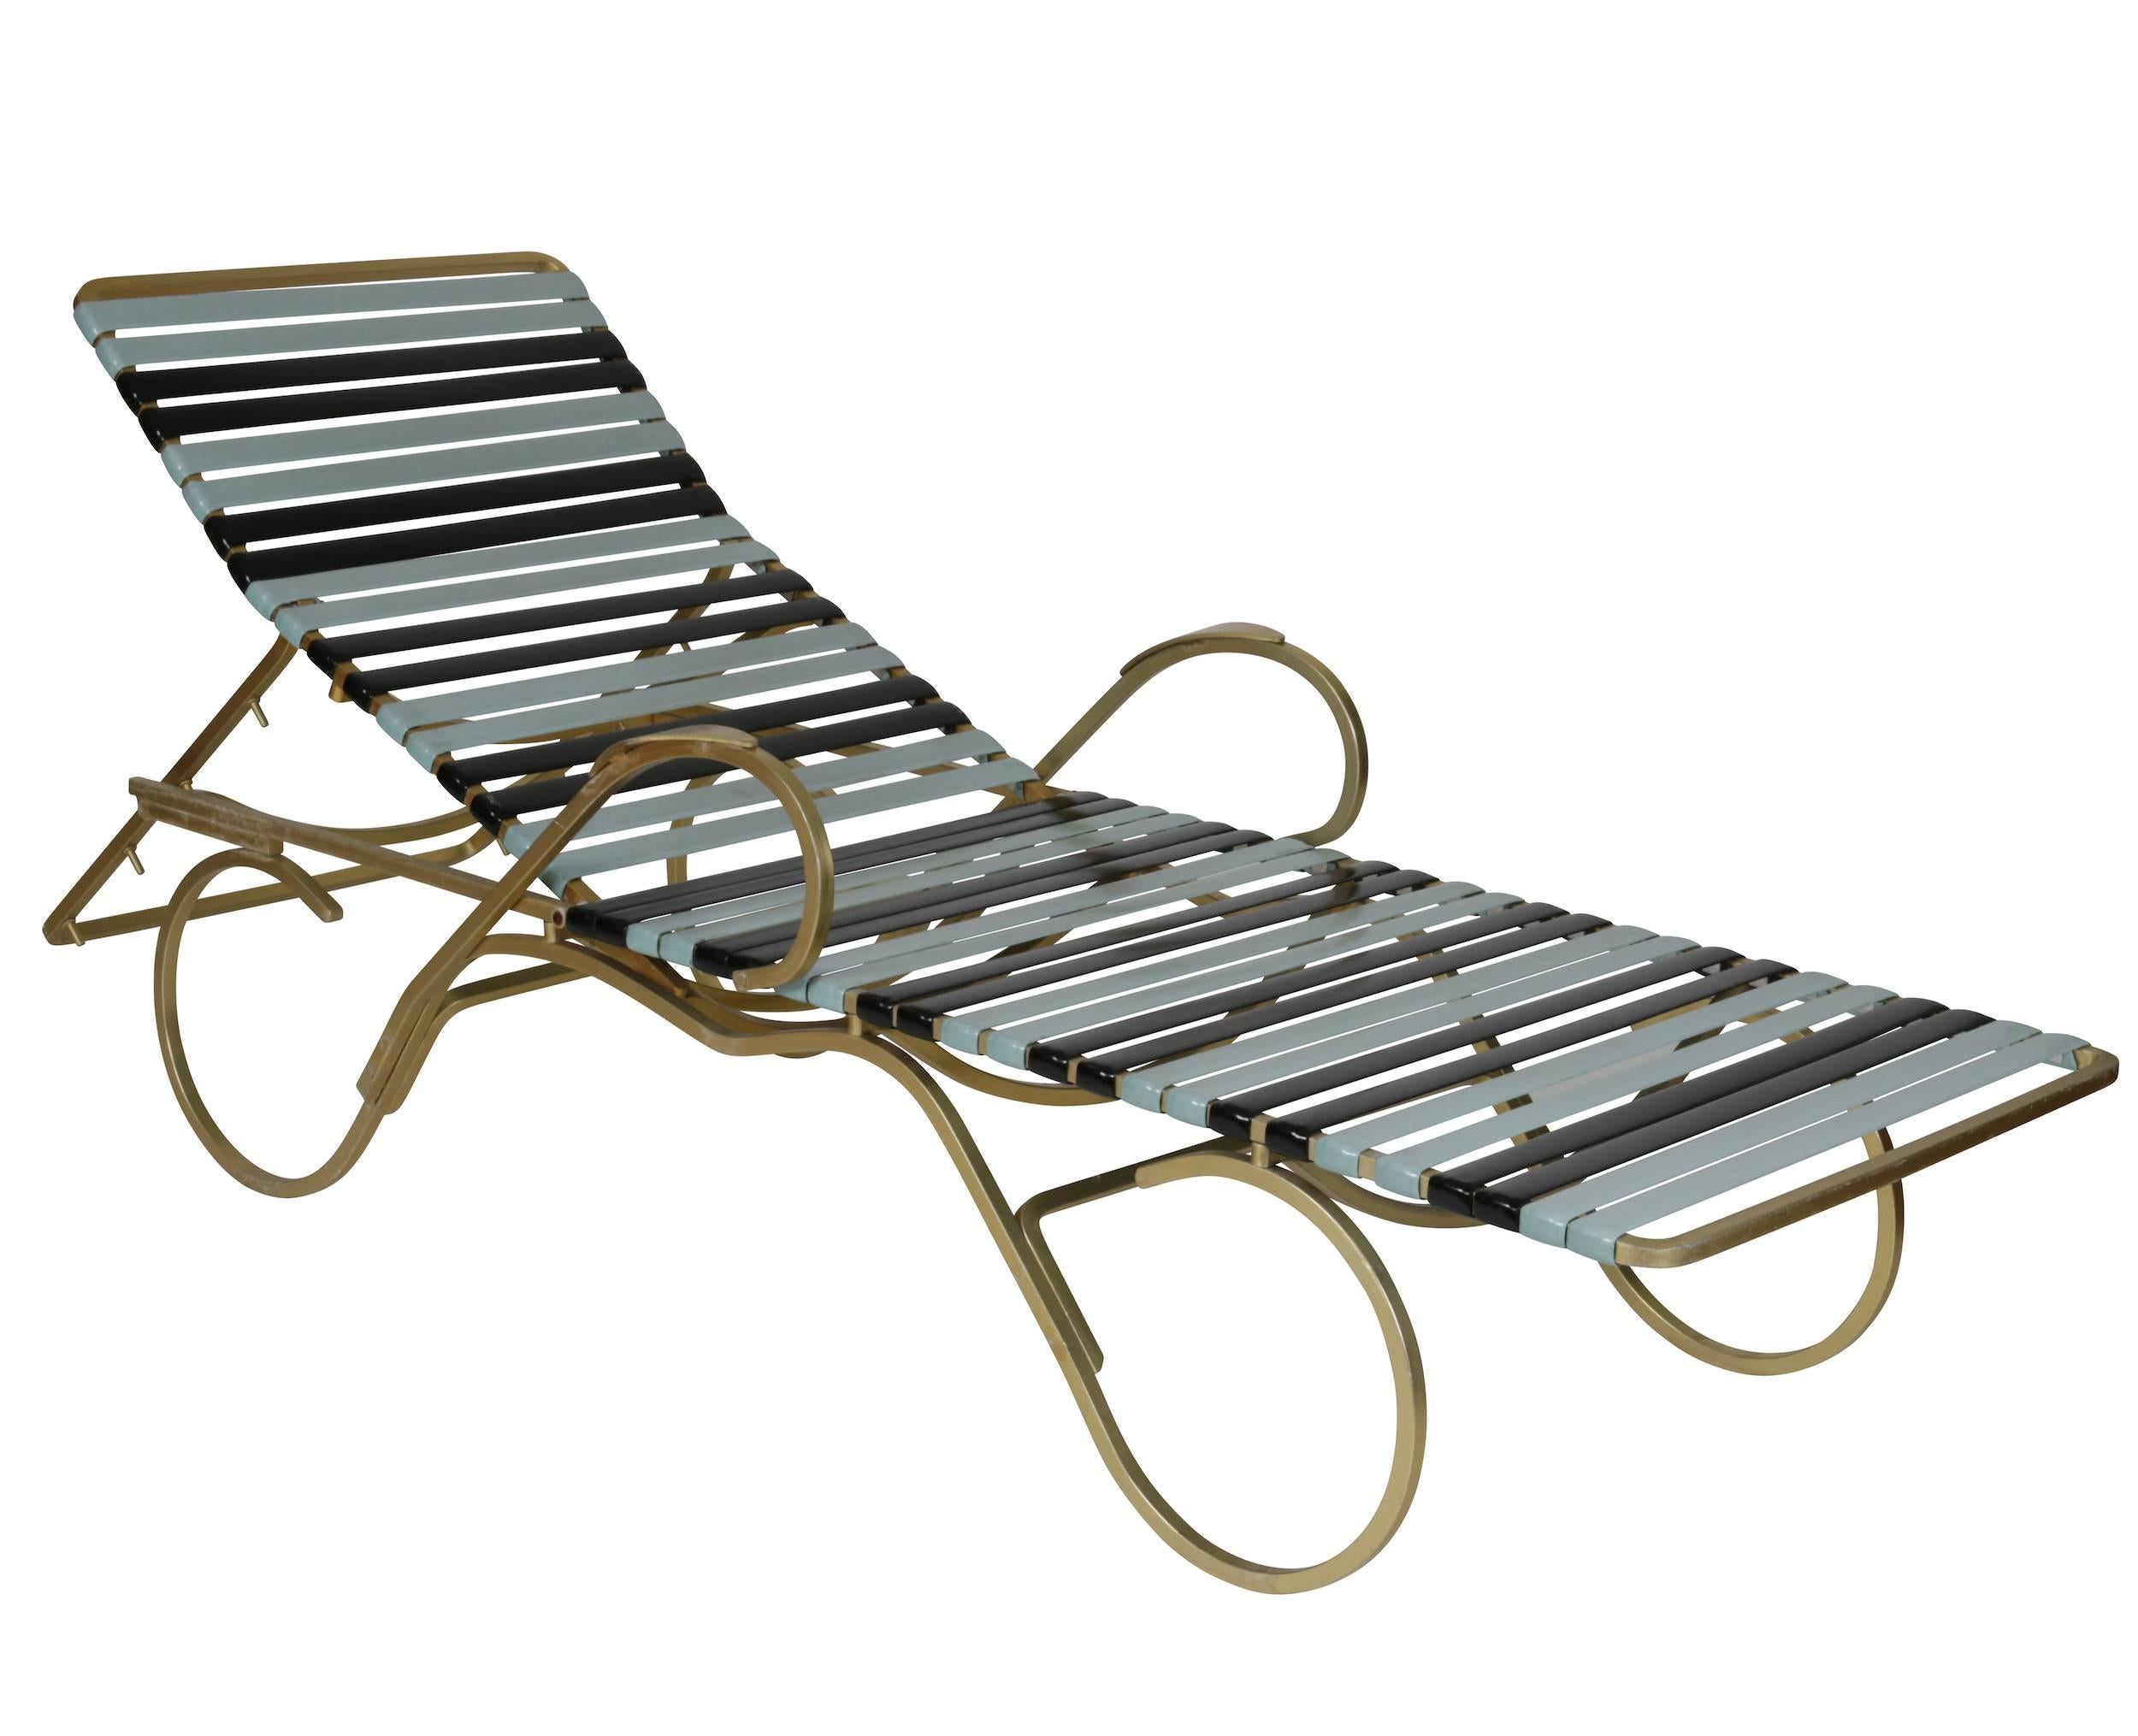 Two fabulous chaise longue with brass electro-plate curled metal frames and two-tone rubber straps in pale Mid-Century blue and midnight black. Lovely curves all the way around, these chaises longue look wonderful on display in the garden and at the